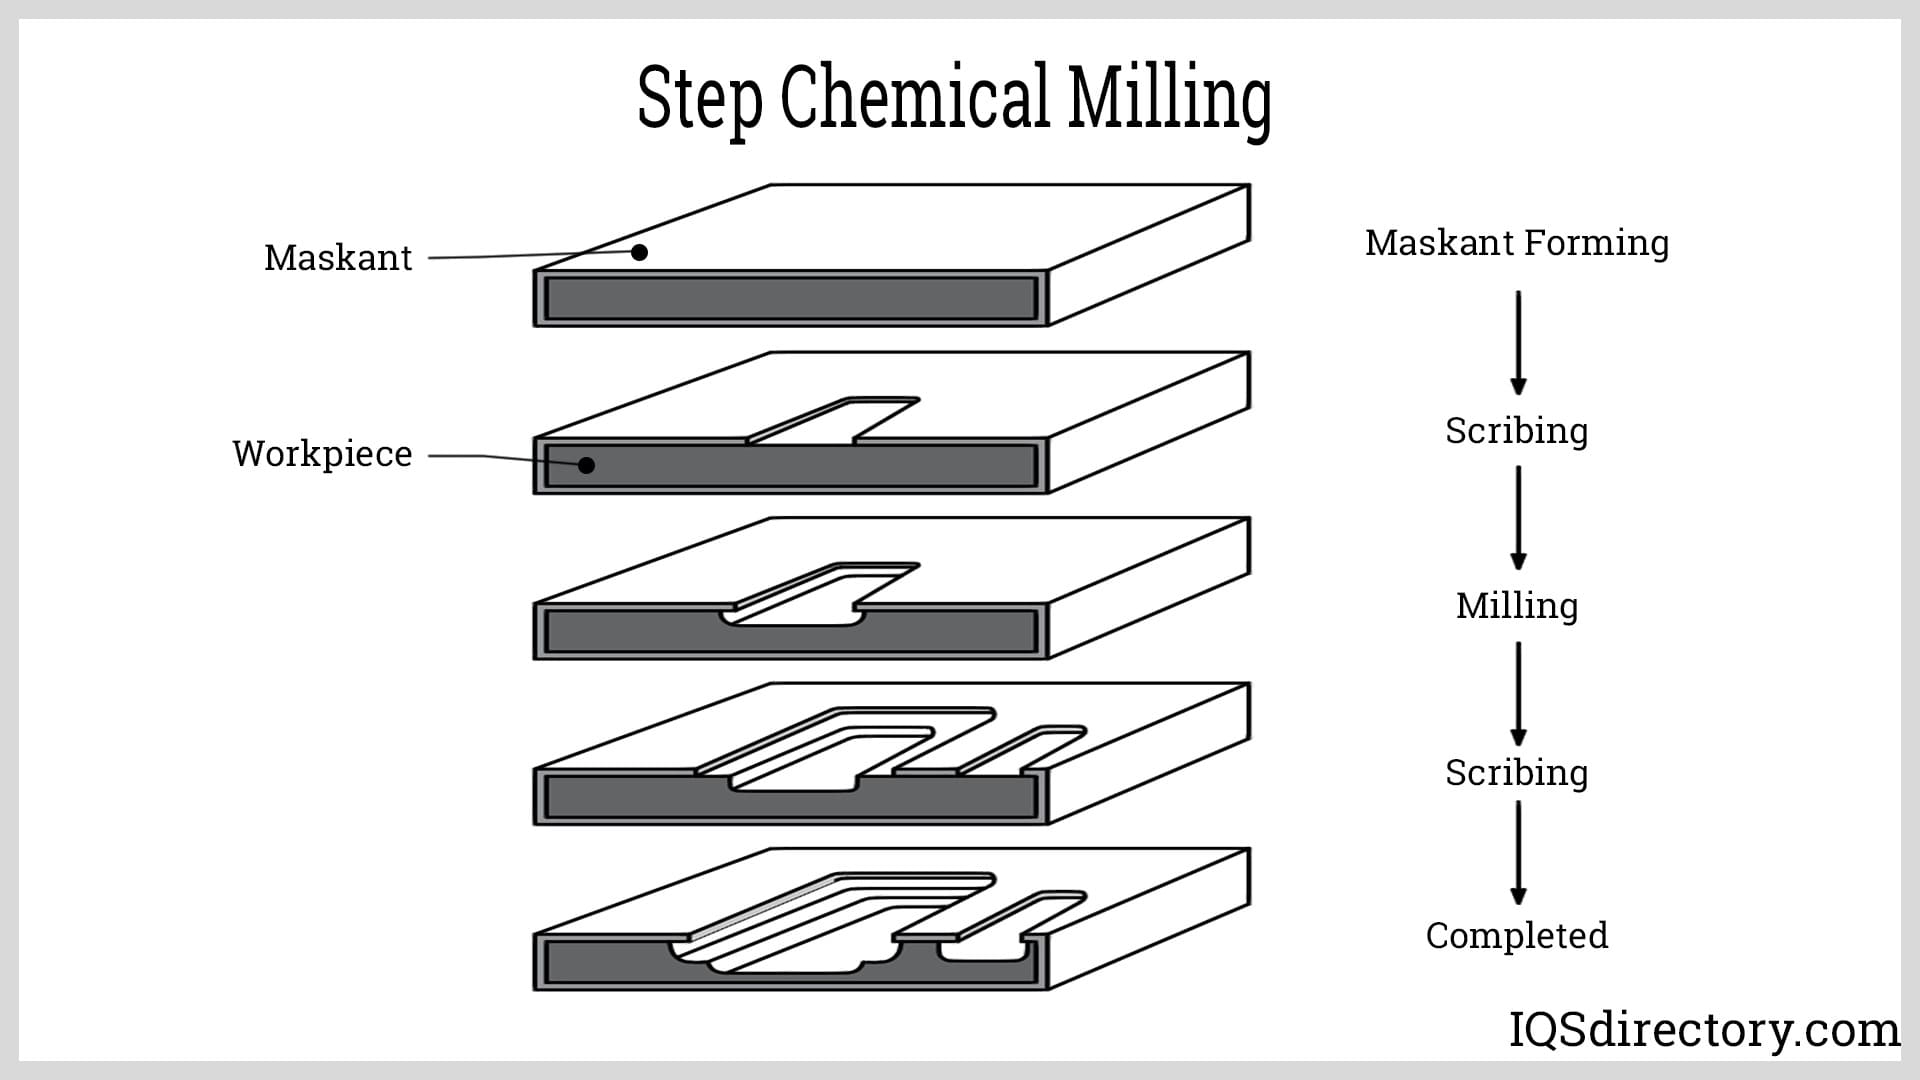 Step Chemical Milling